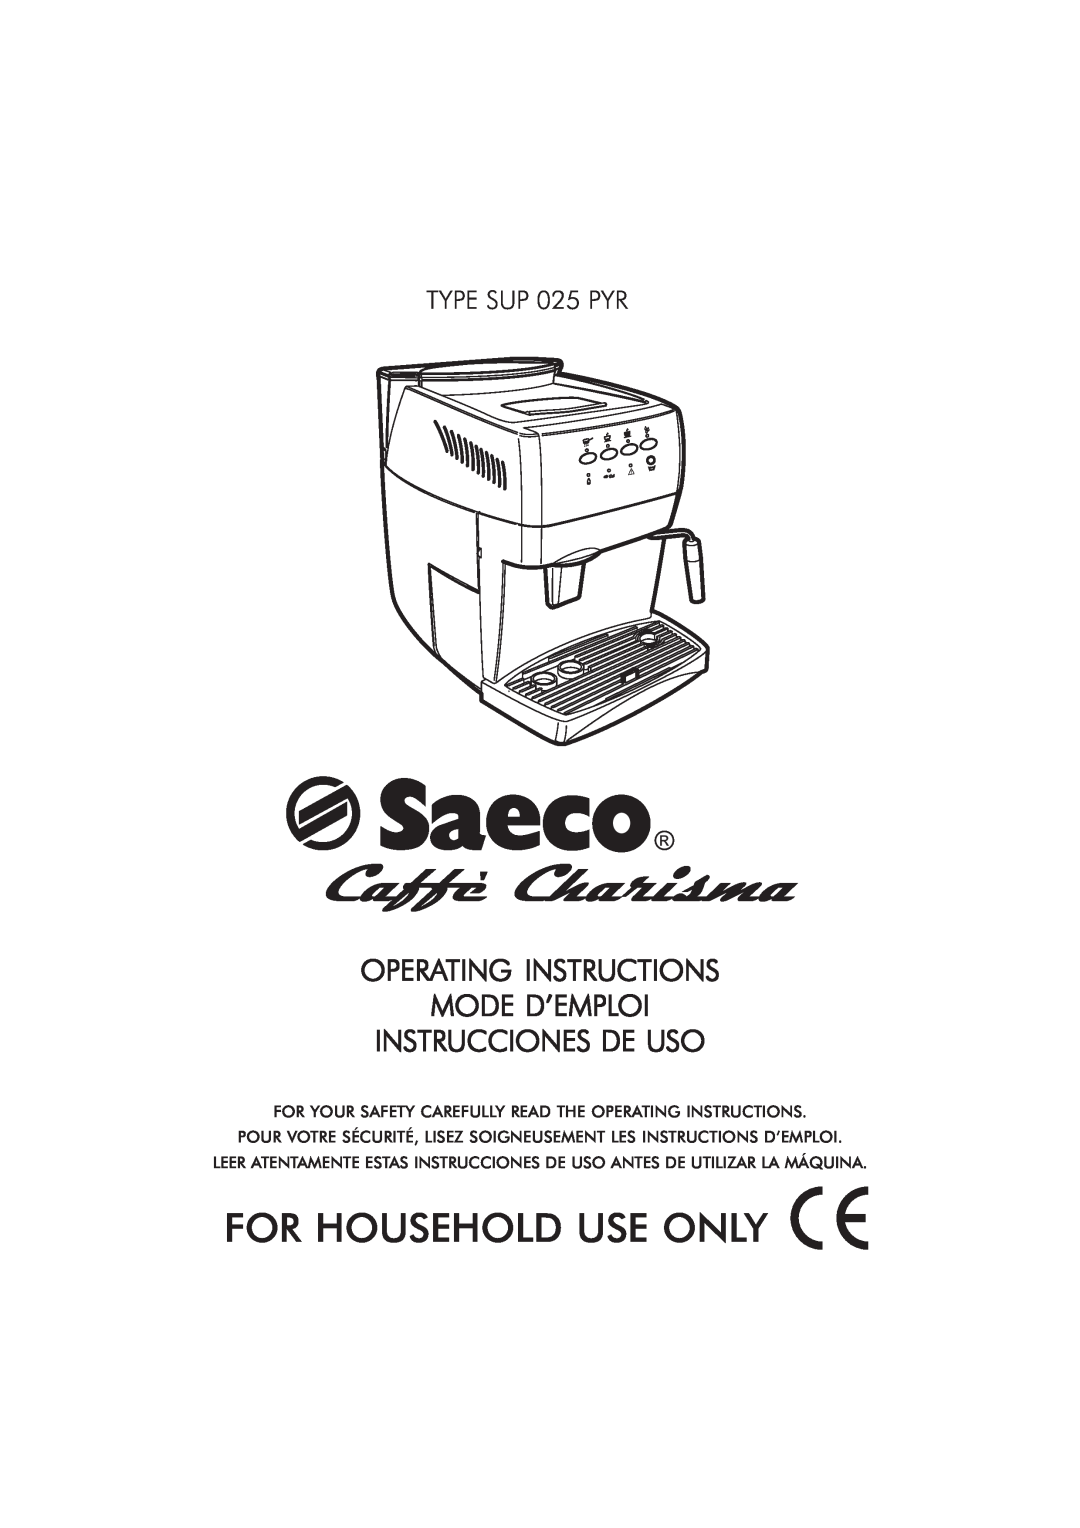 Saeco Coffee Makers SUP 025 PYR manual For Household Use Only, Operating Instructions Mode D’Emploi, Instrucciones De Uso 